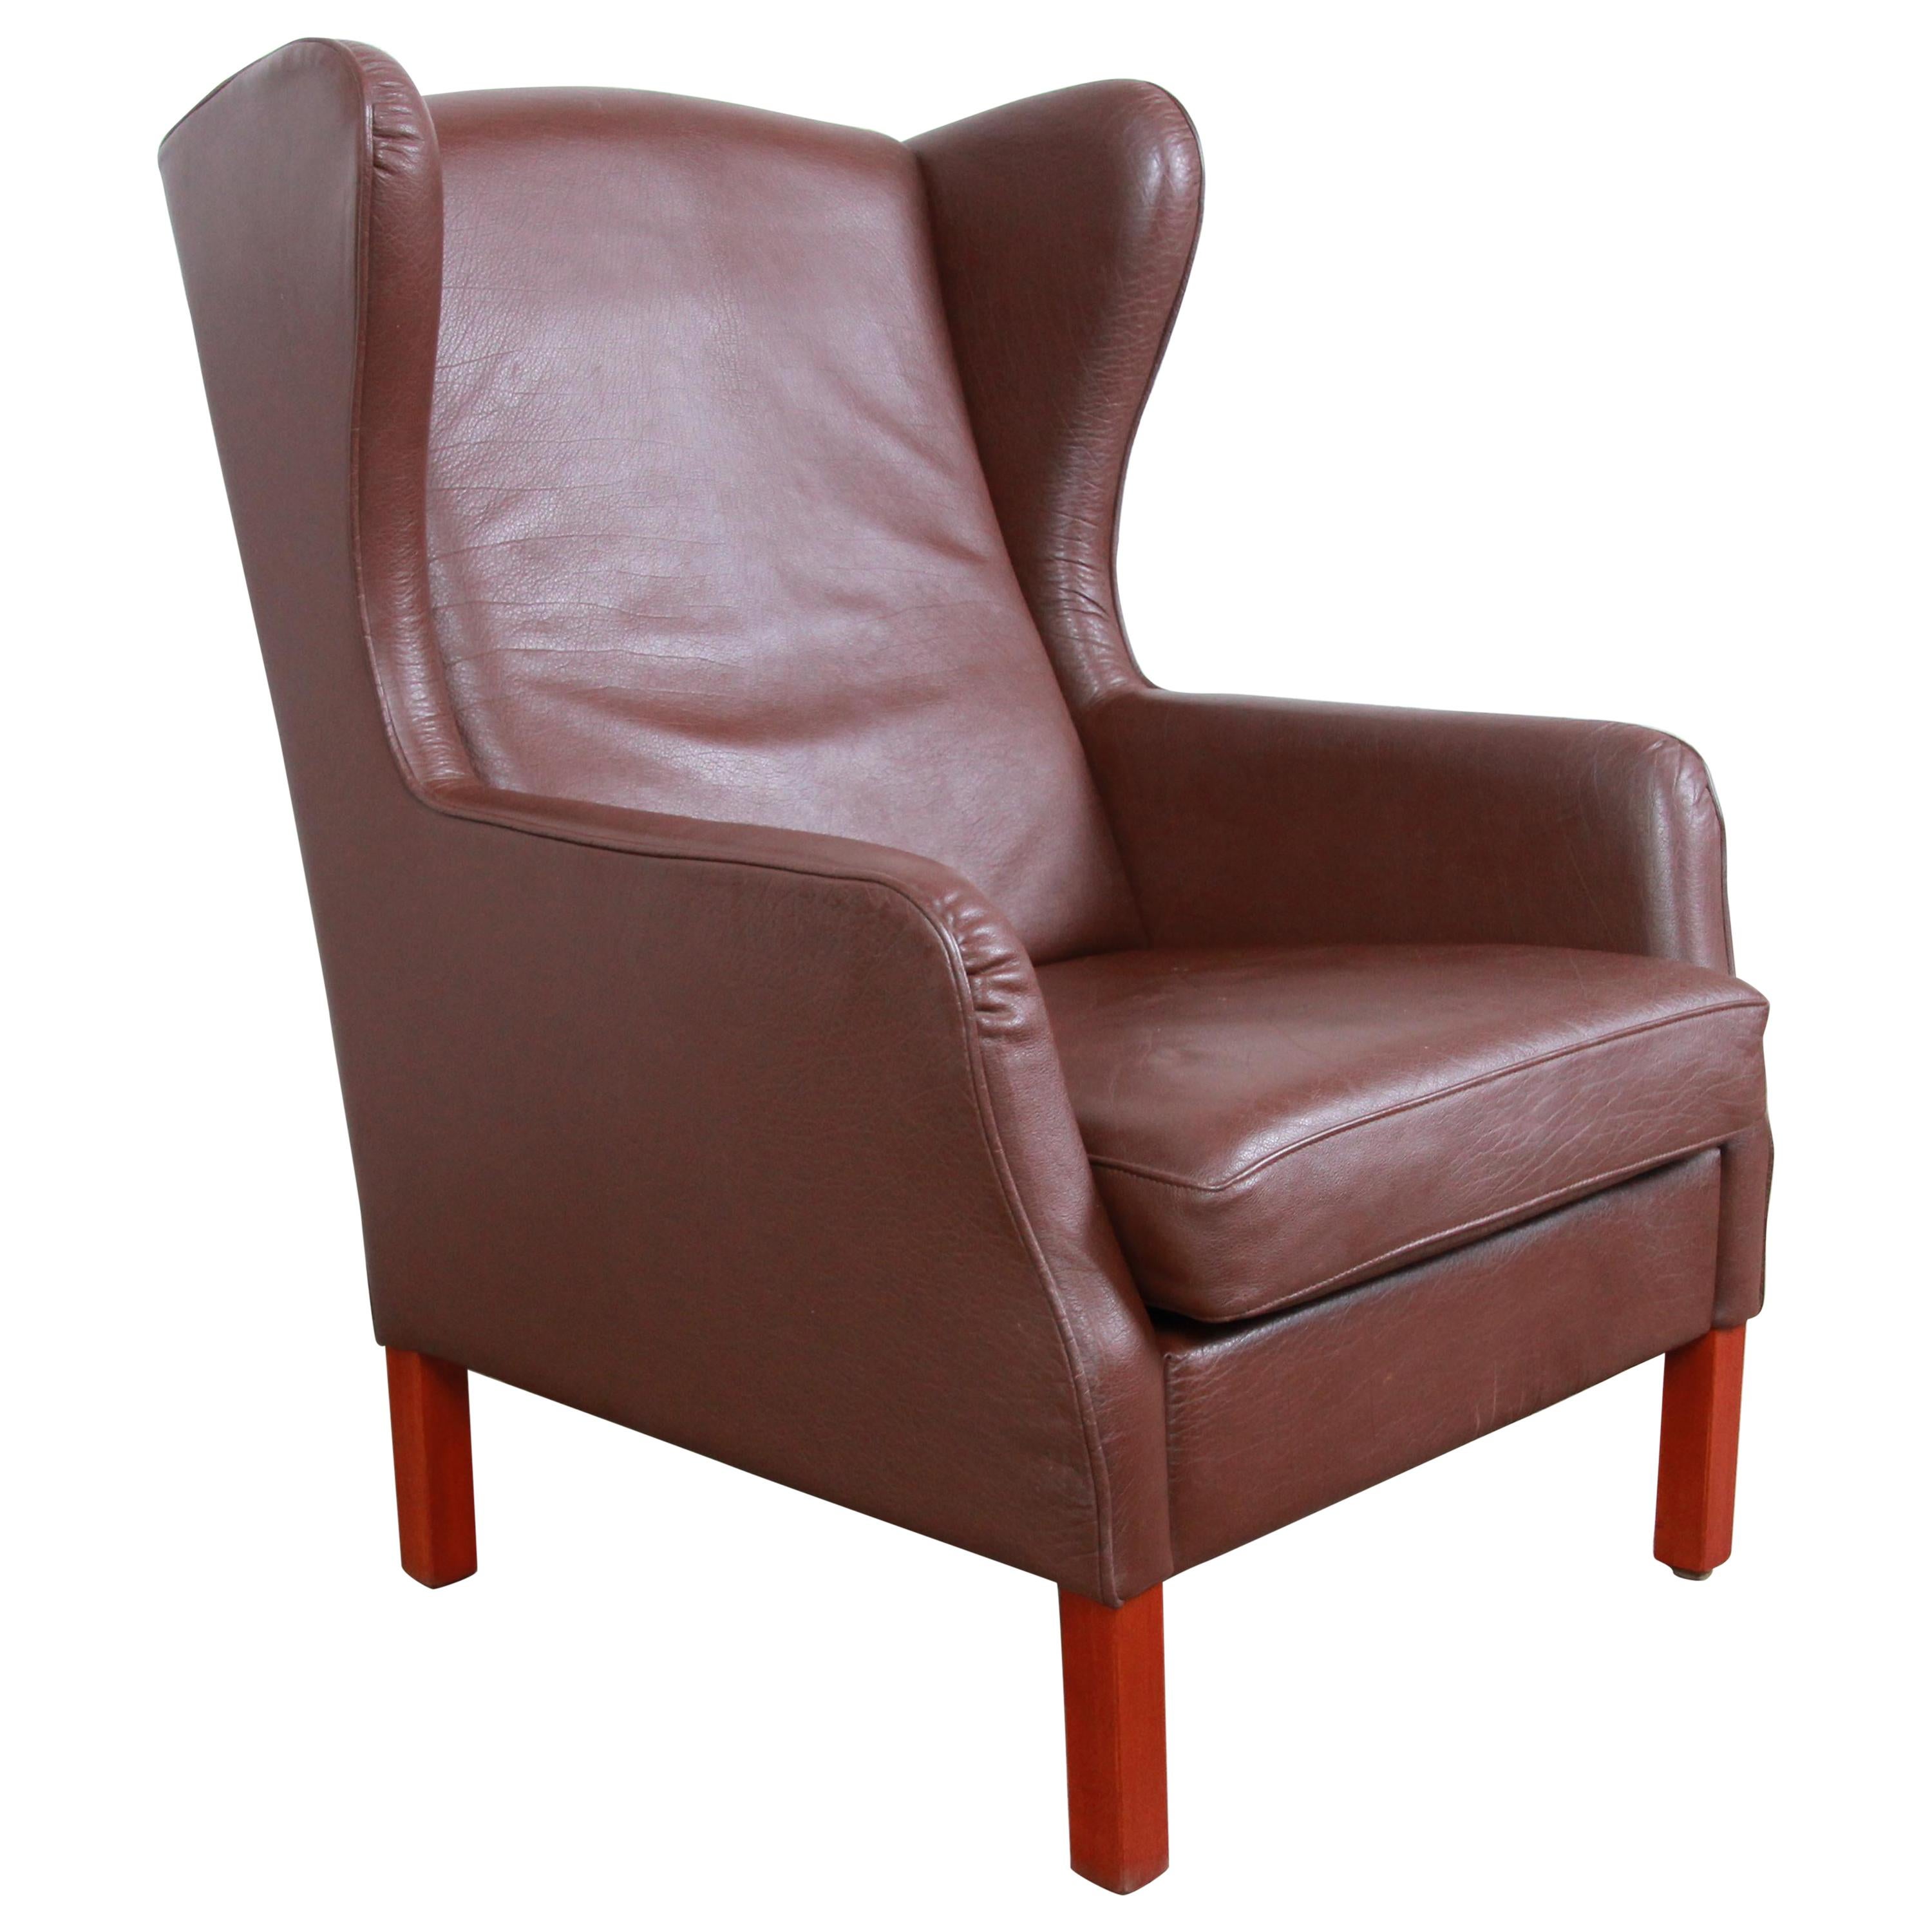 Borge Mogensen Style Danish Modern Brown Leather Wingback Lounge Chair